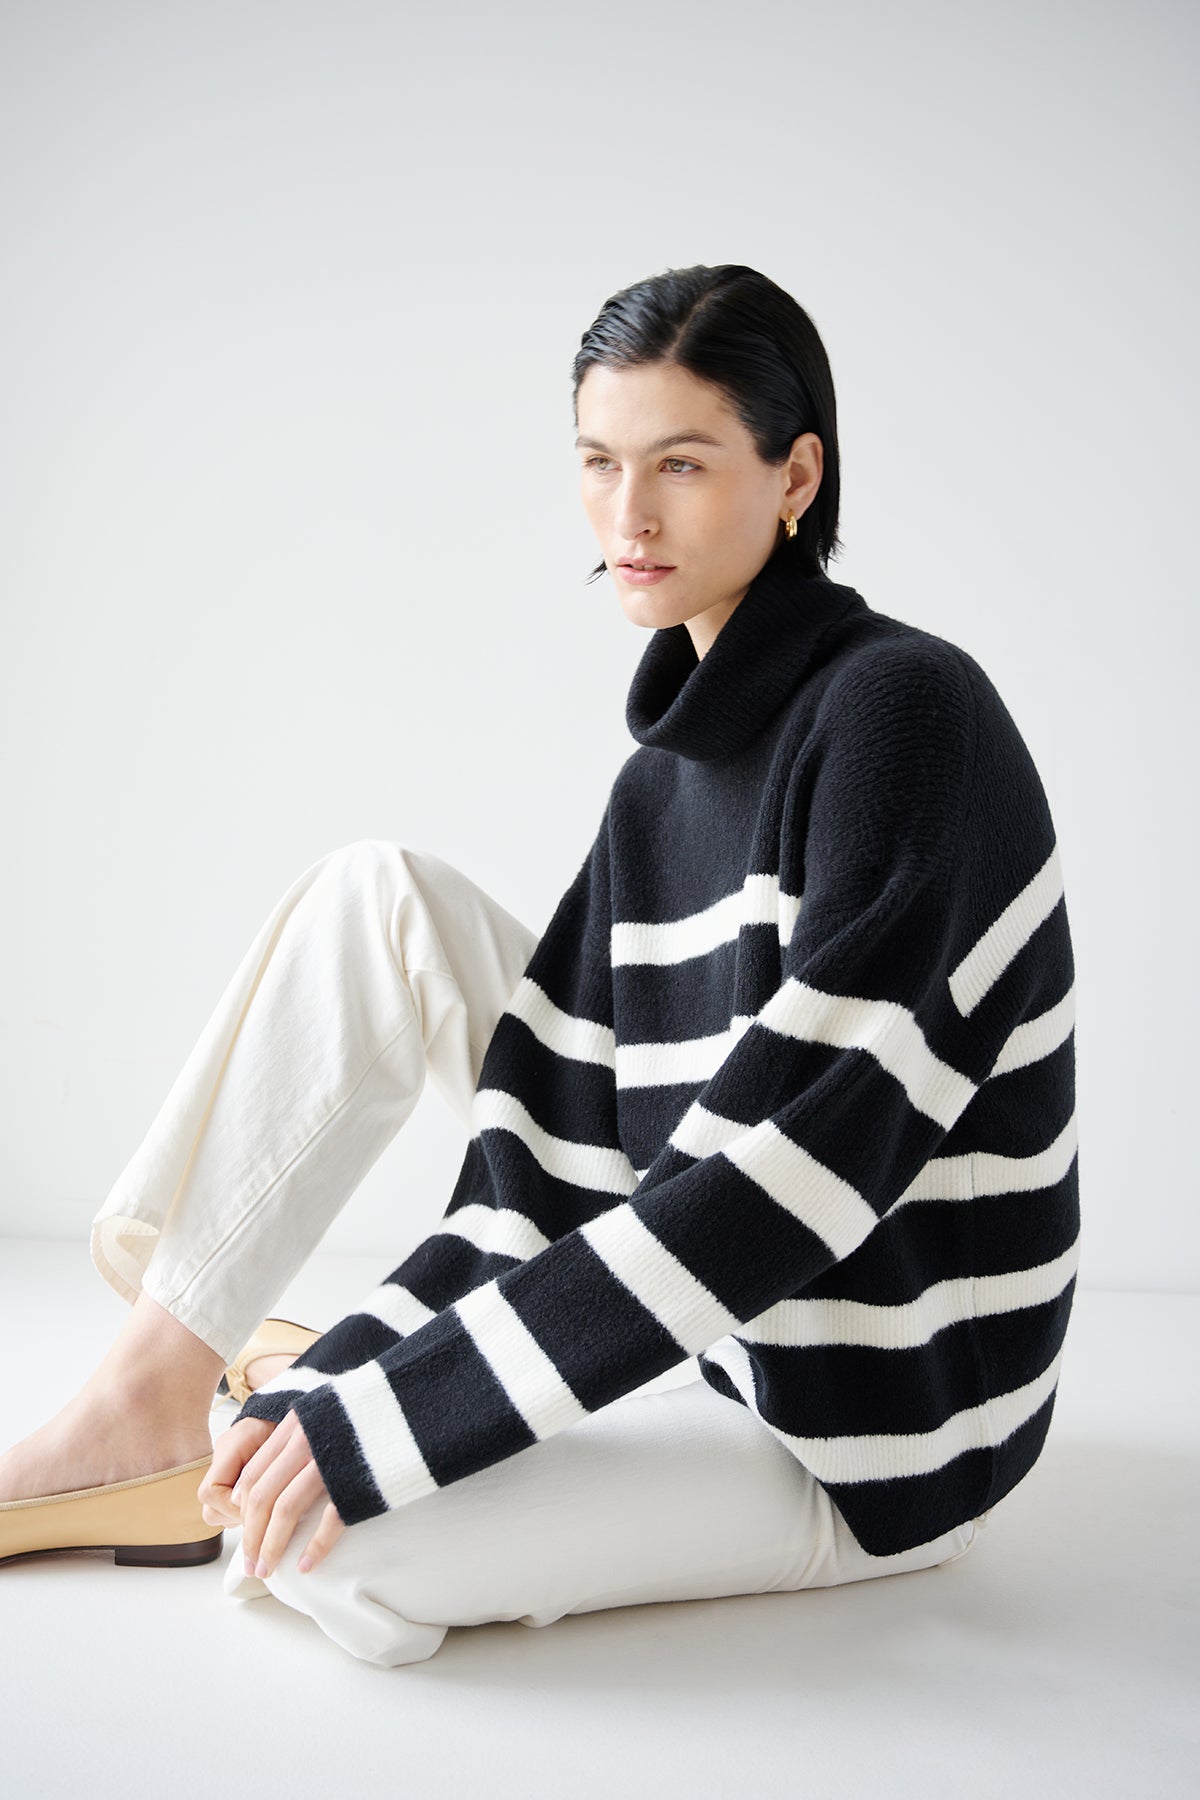 A model wearing the Velvet by Jenny Graham ENCINO sweater, an oversized black and white striped turtleneck sweater in a wool blend fabric.-35547404763329